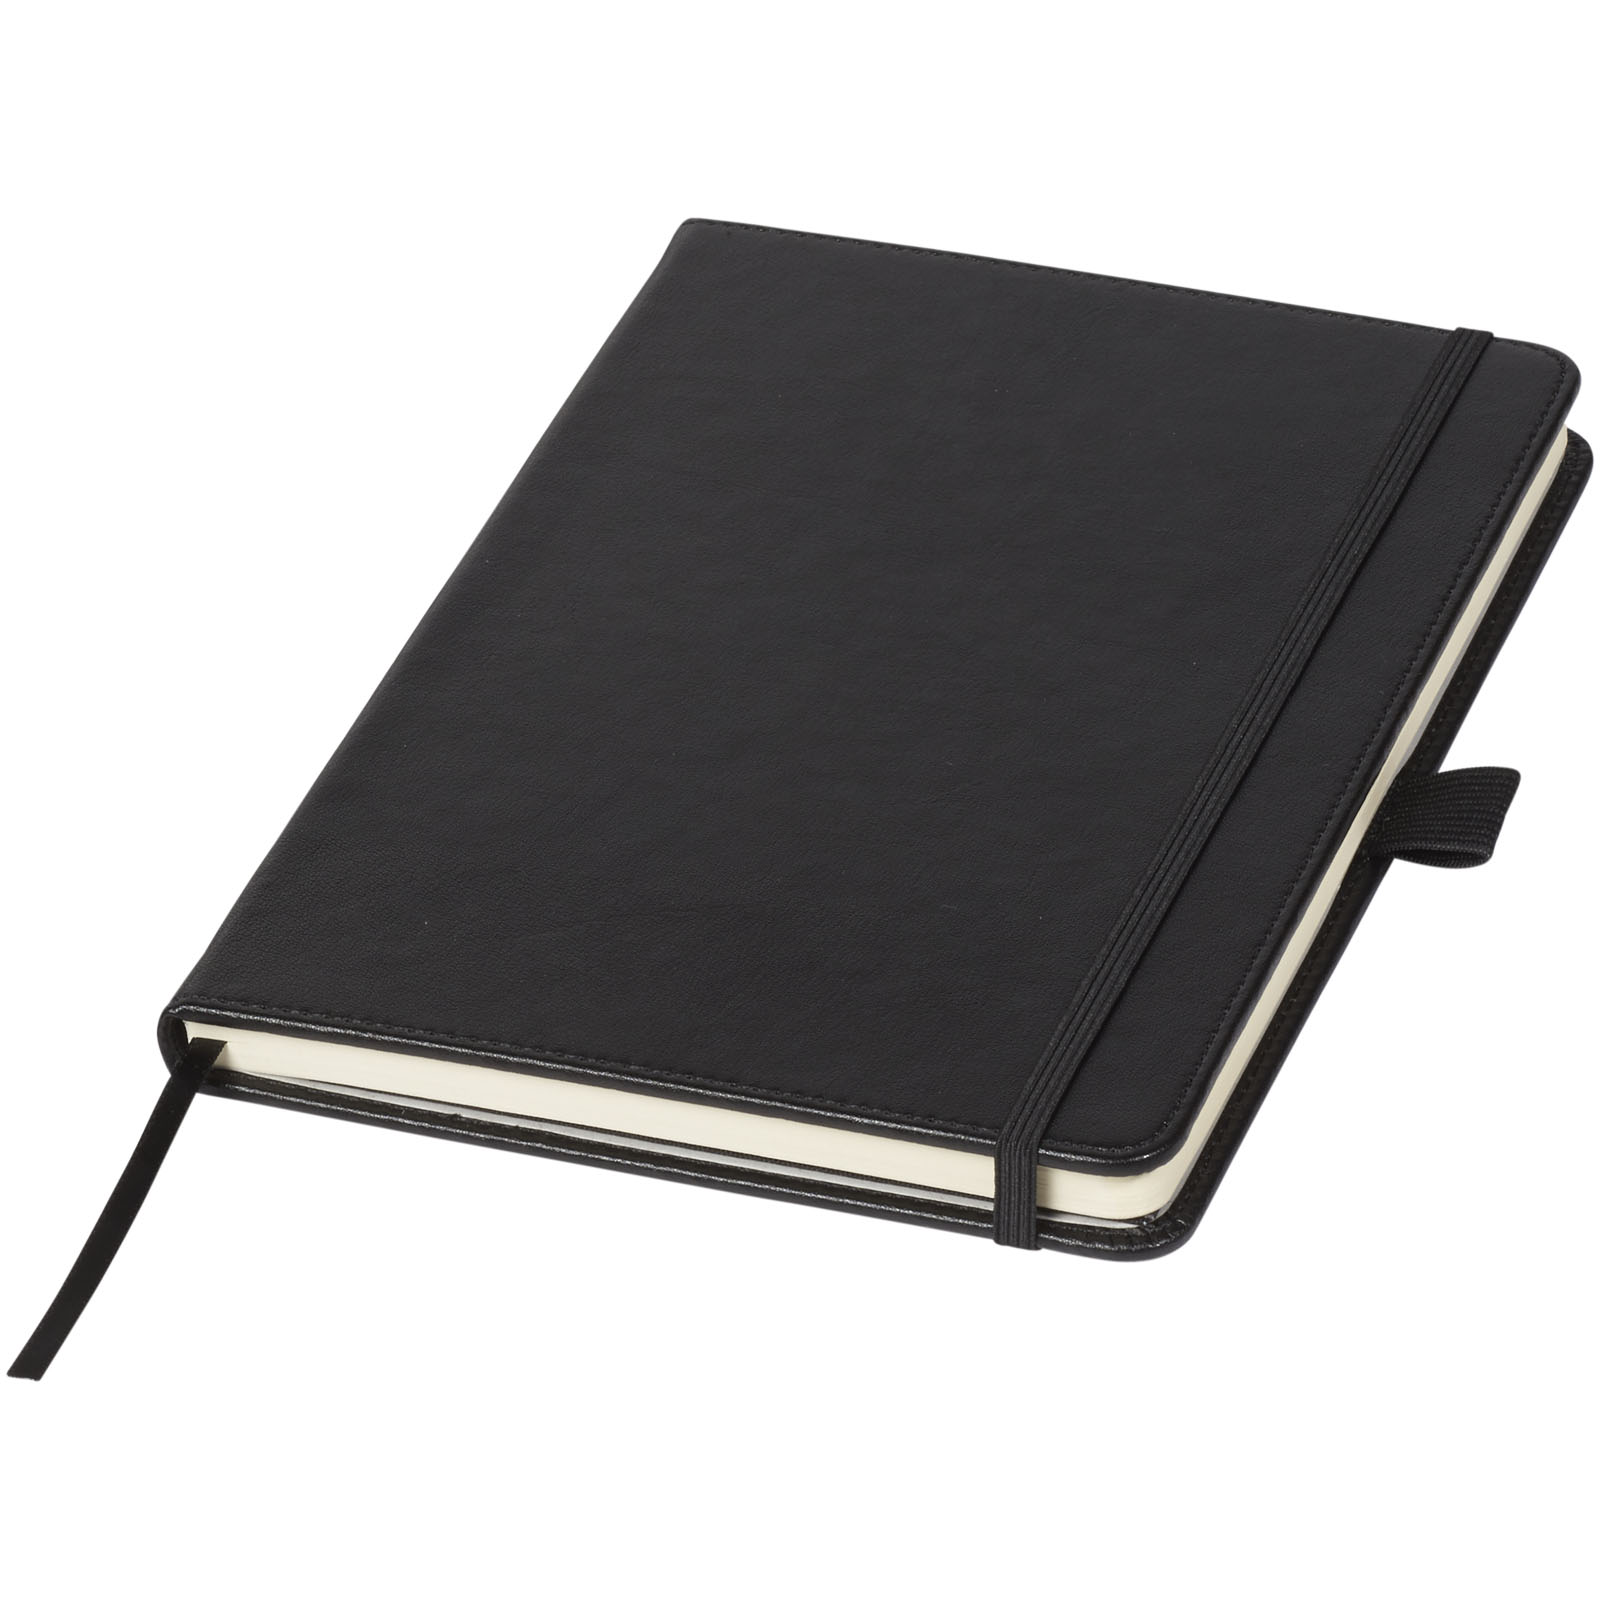 Hard cover notebooks - Bound A5 notebook